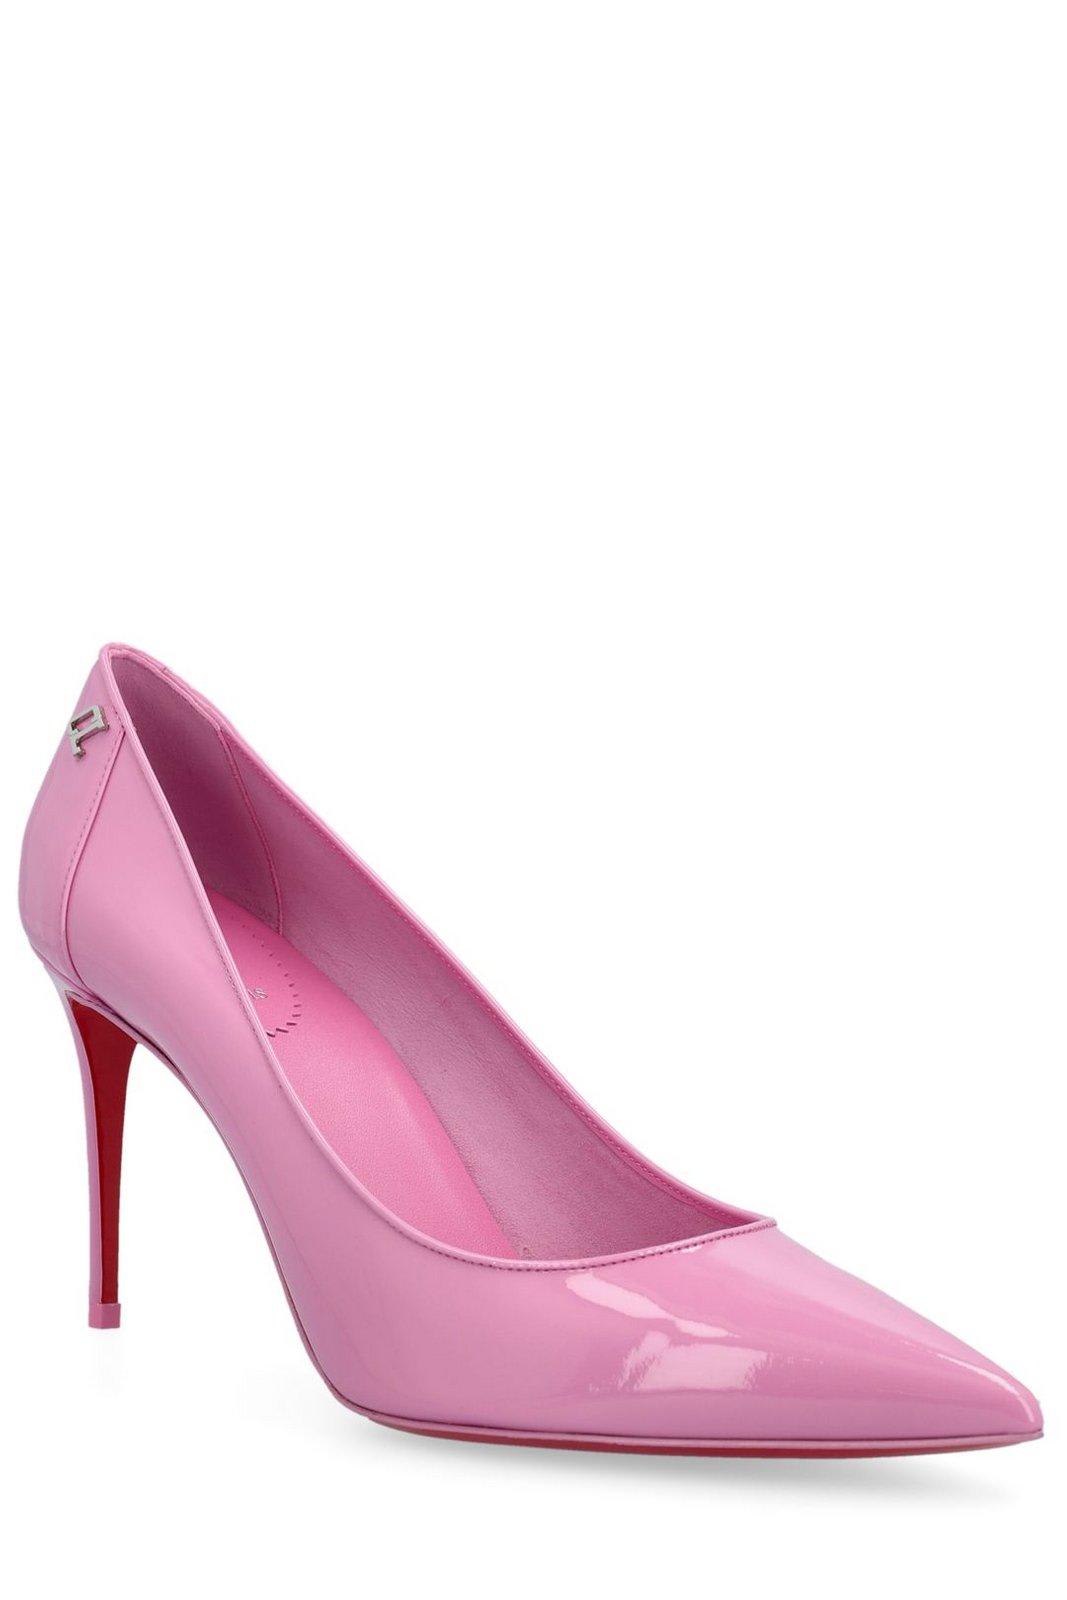 Shop Christian Louboutin Sporty Kate Pumps In Pink